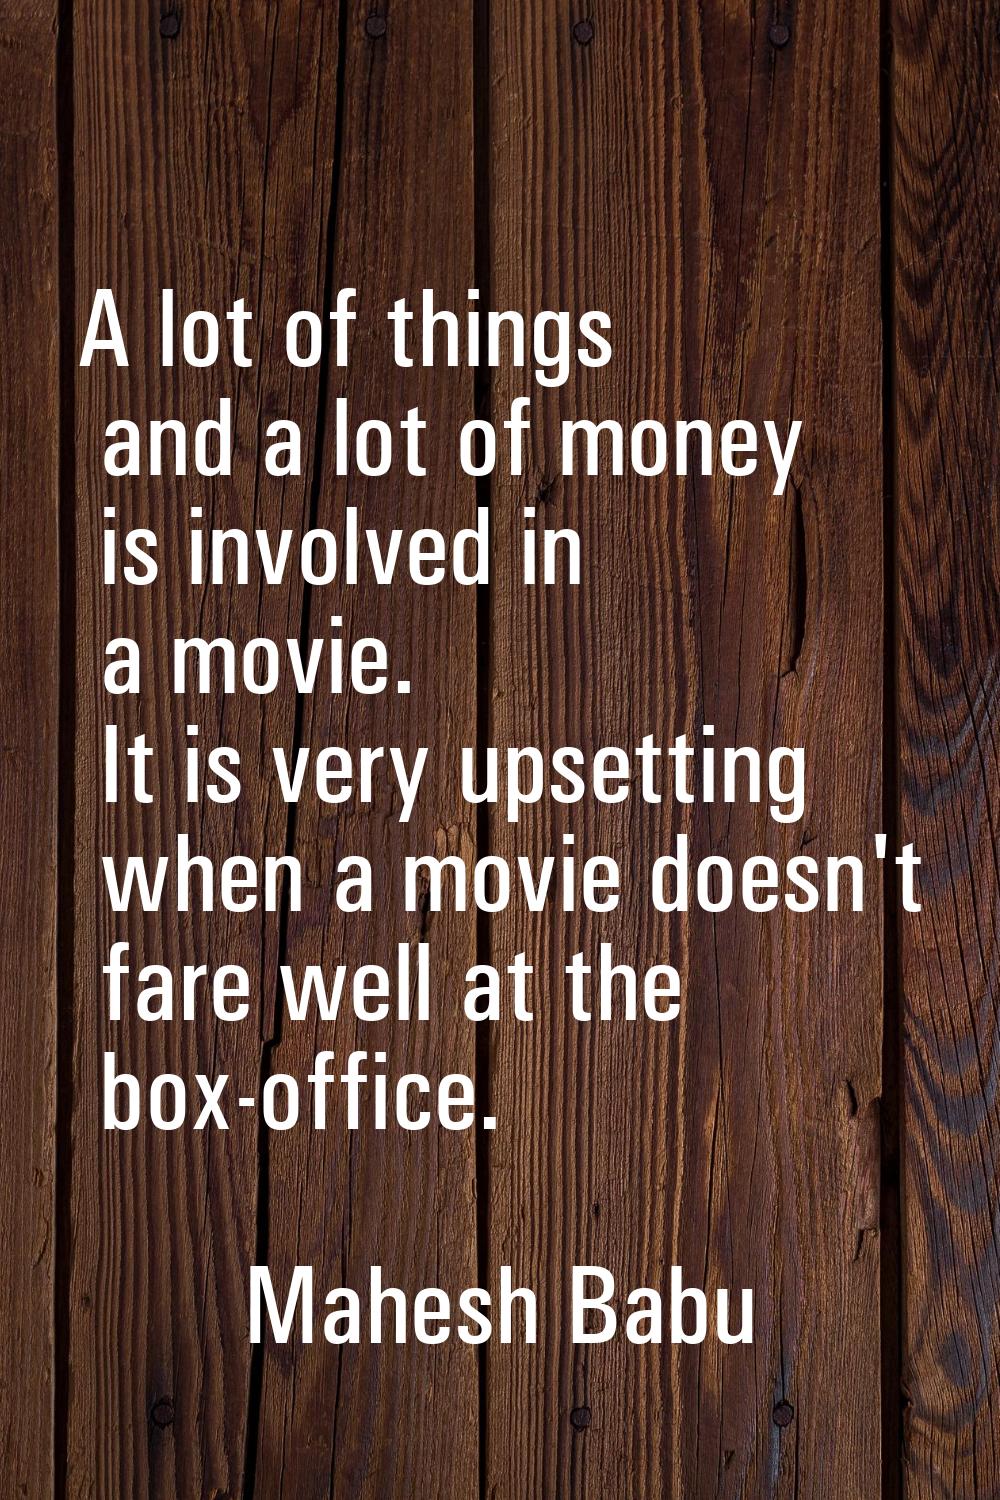 A lot of things and a lot of money is involved in a movie. It is very upsetting when a movie doesn'